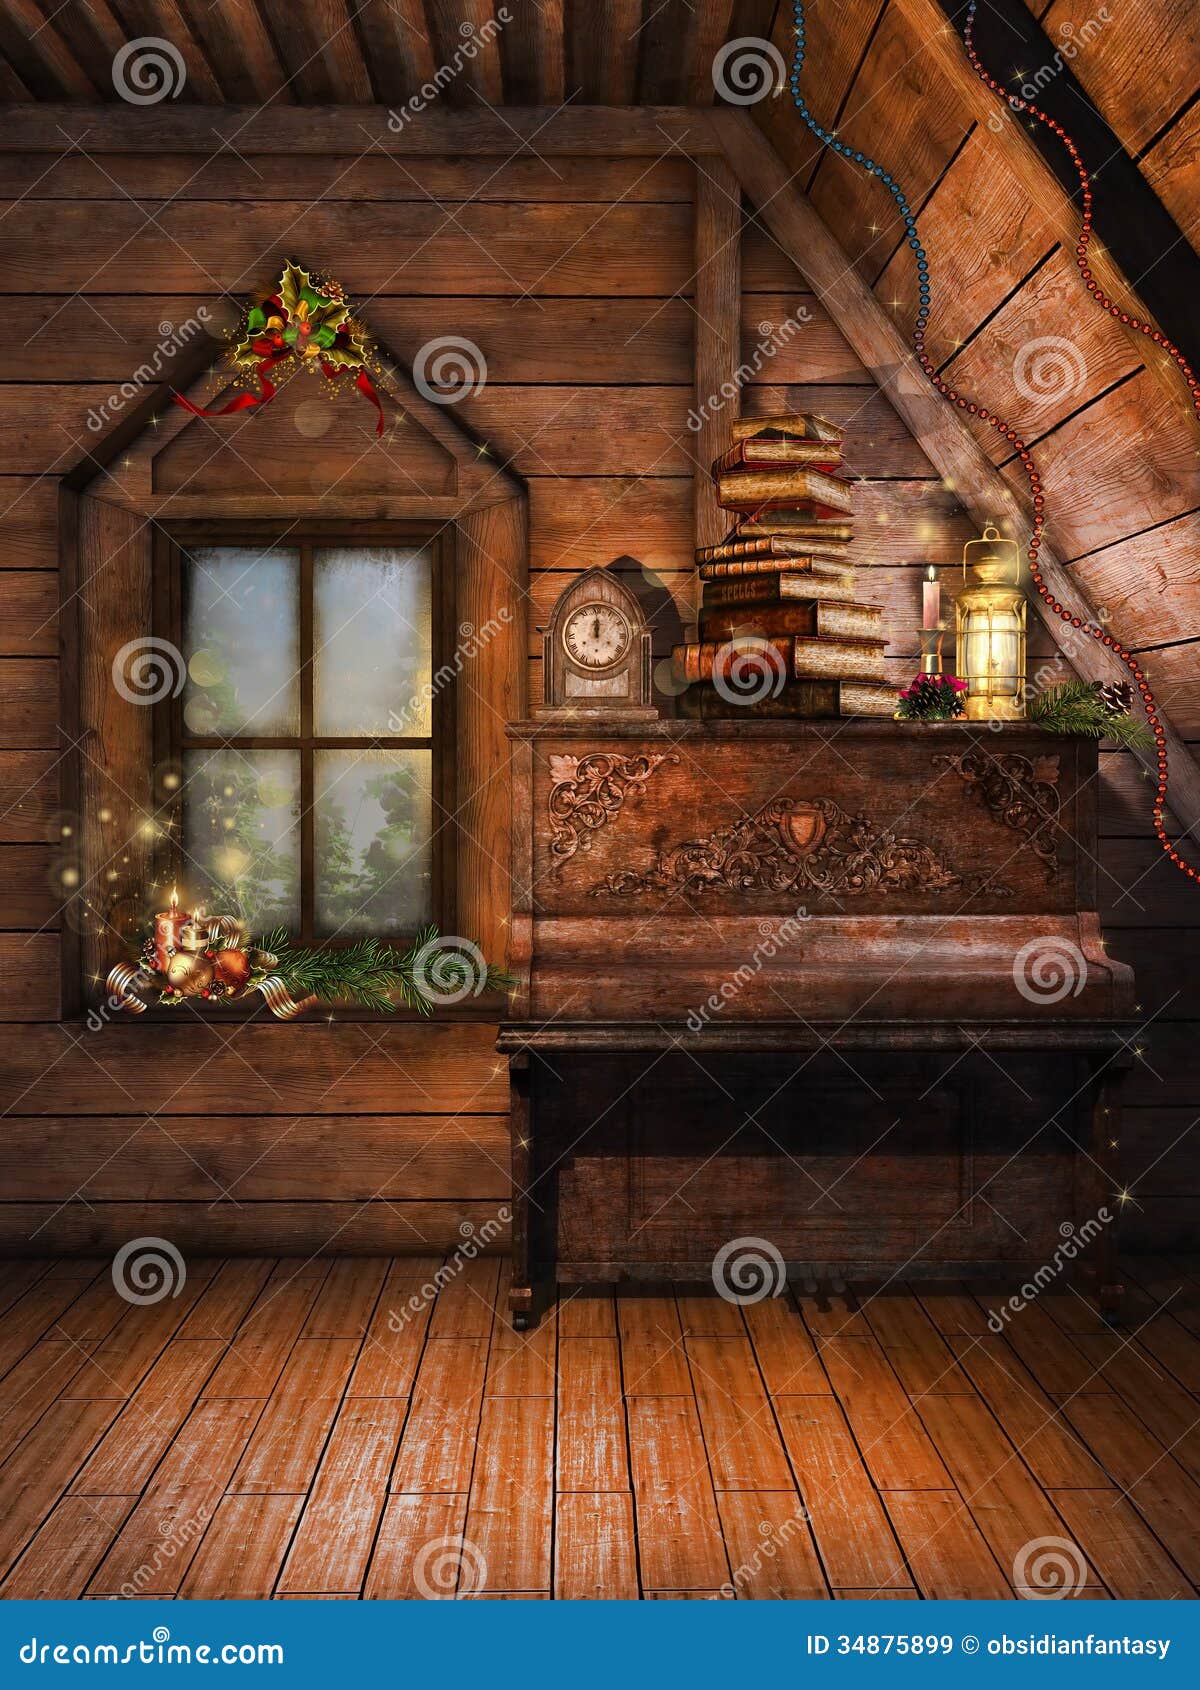 Attic With A Piano And Candles Stock Illustration ...